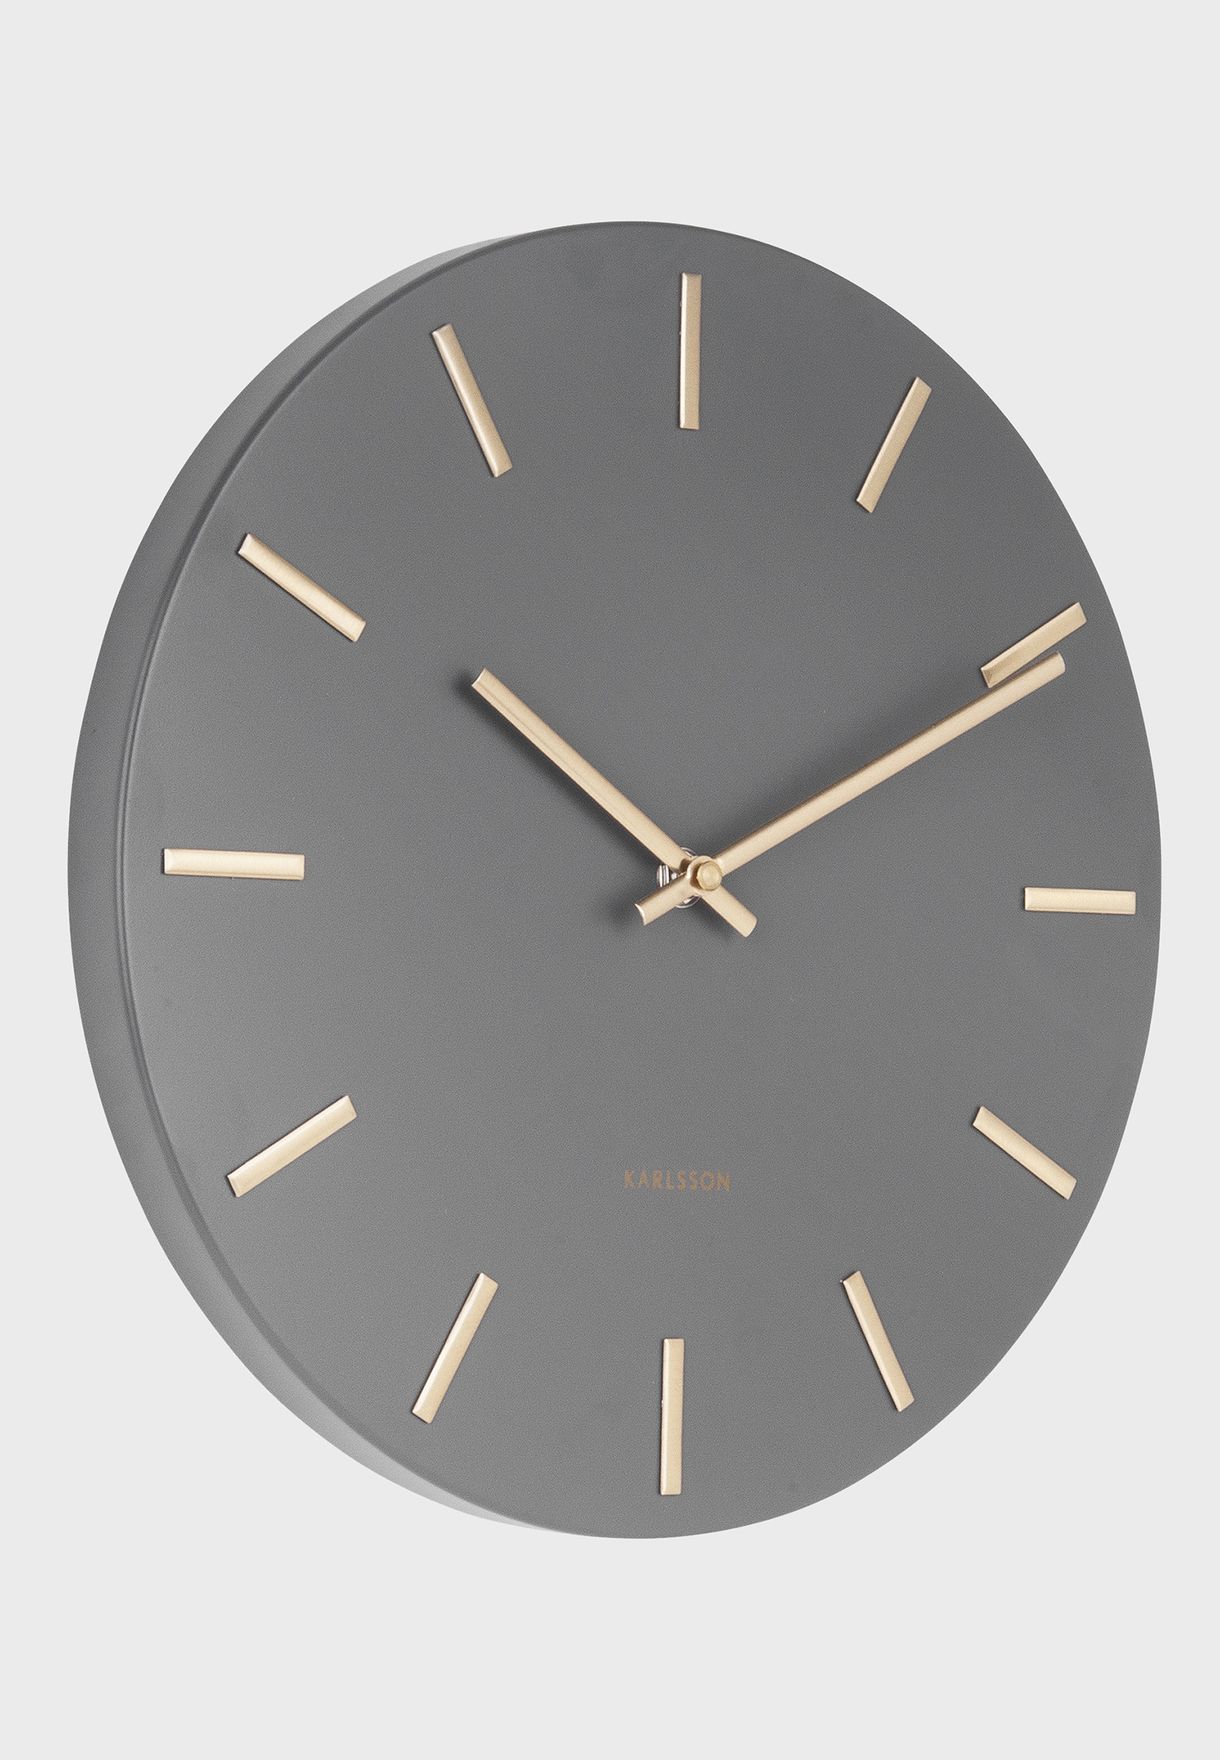 Grey & Gold Charm Wall Clock With Steel Battons